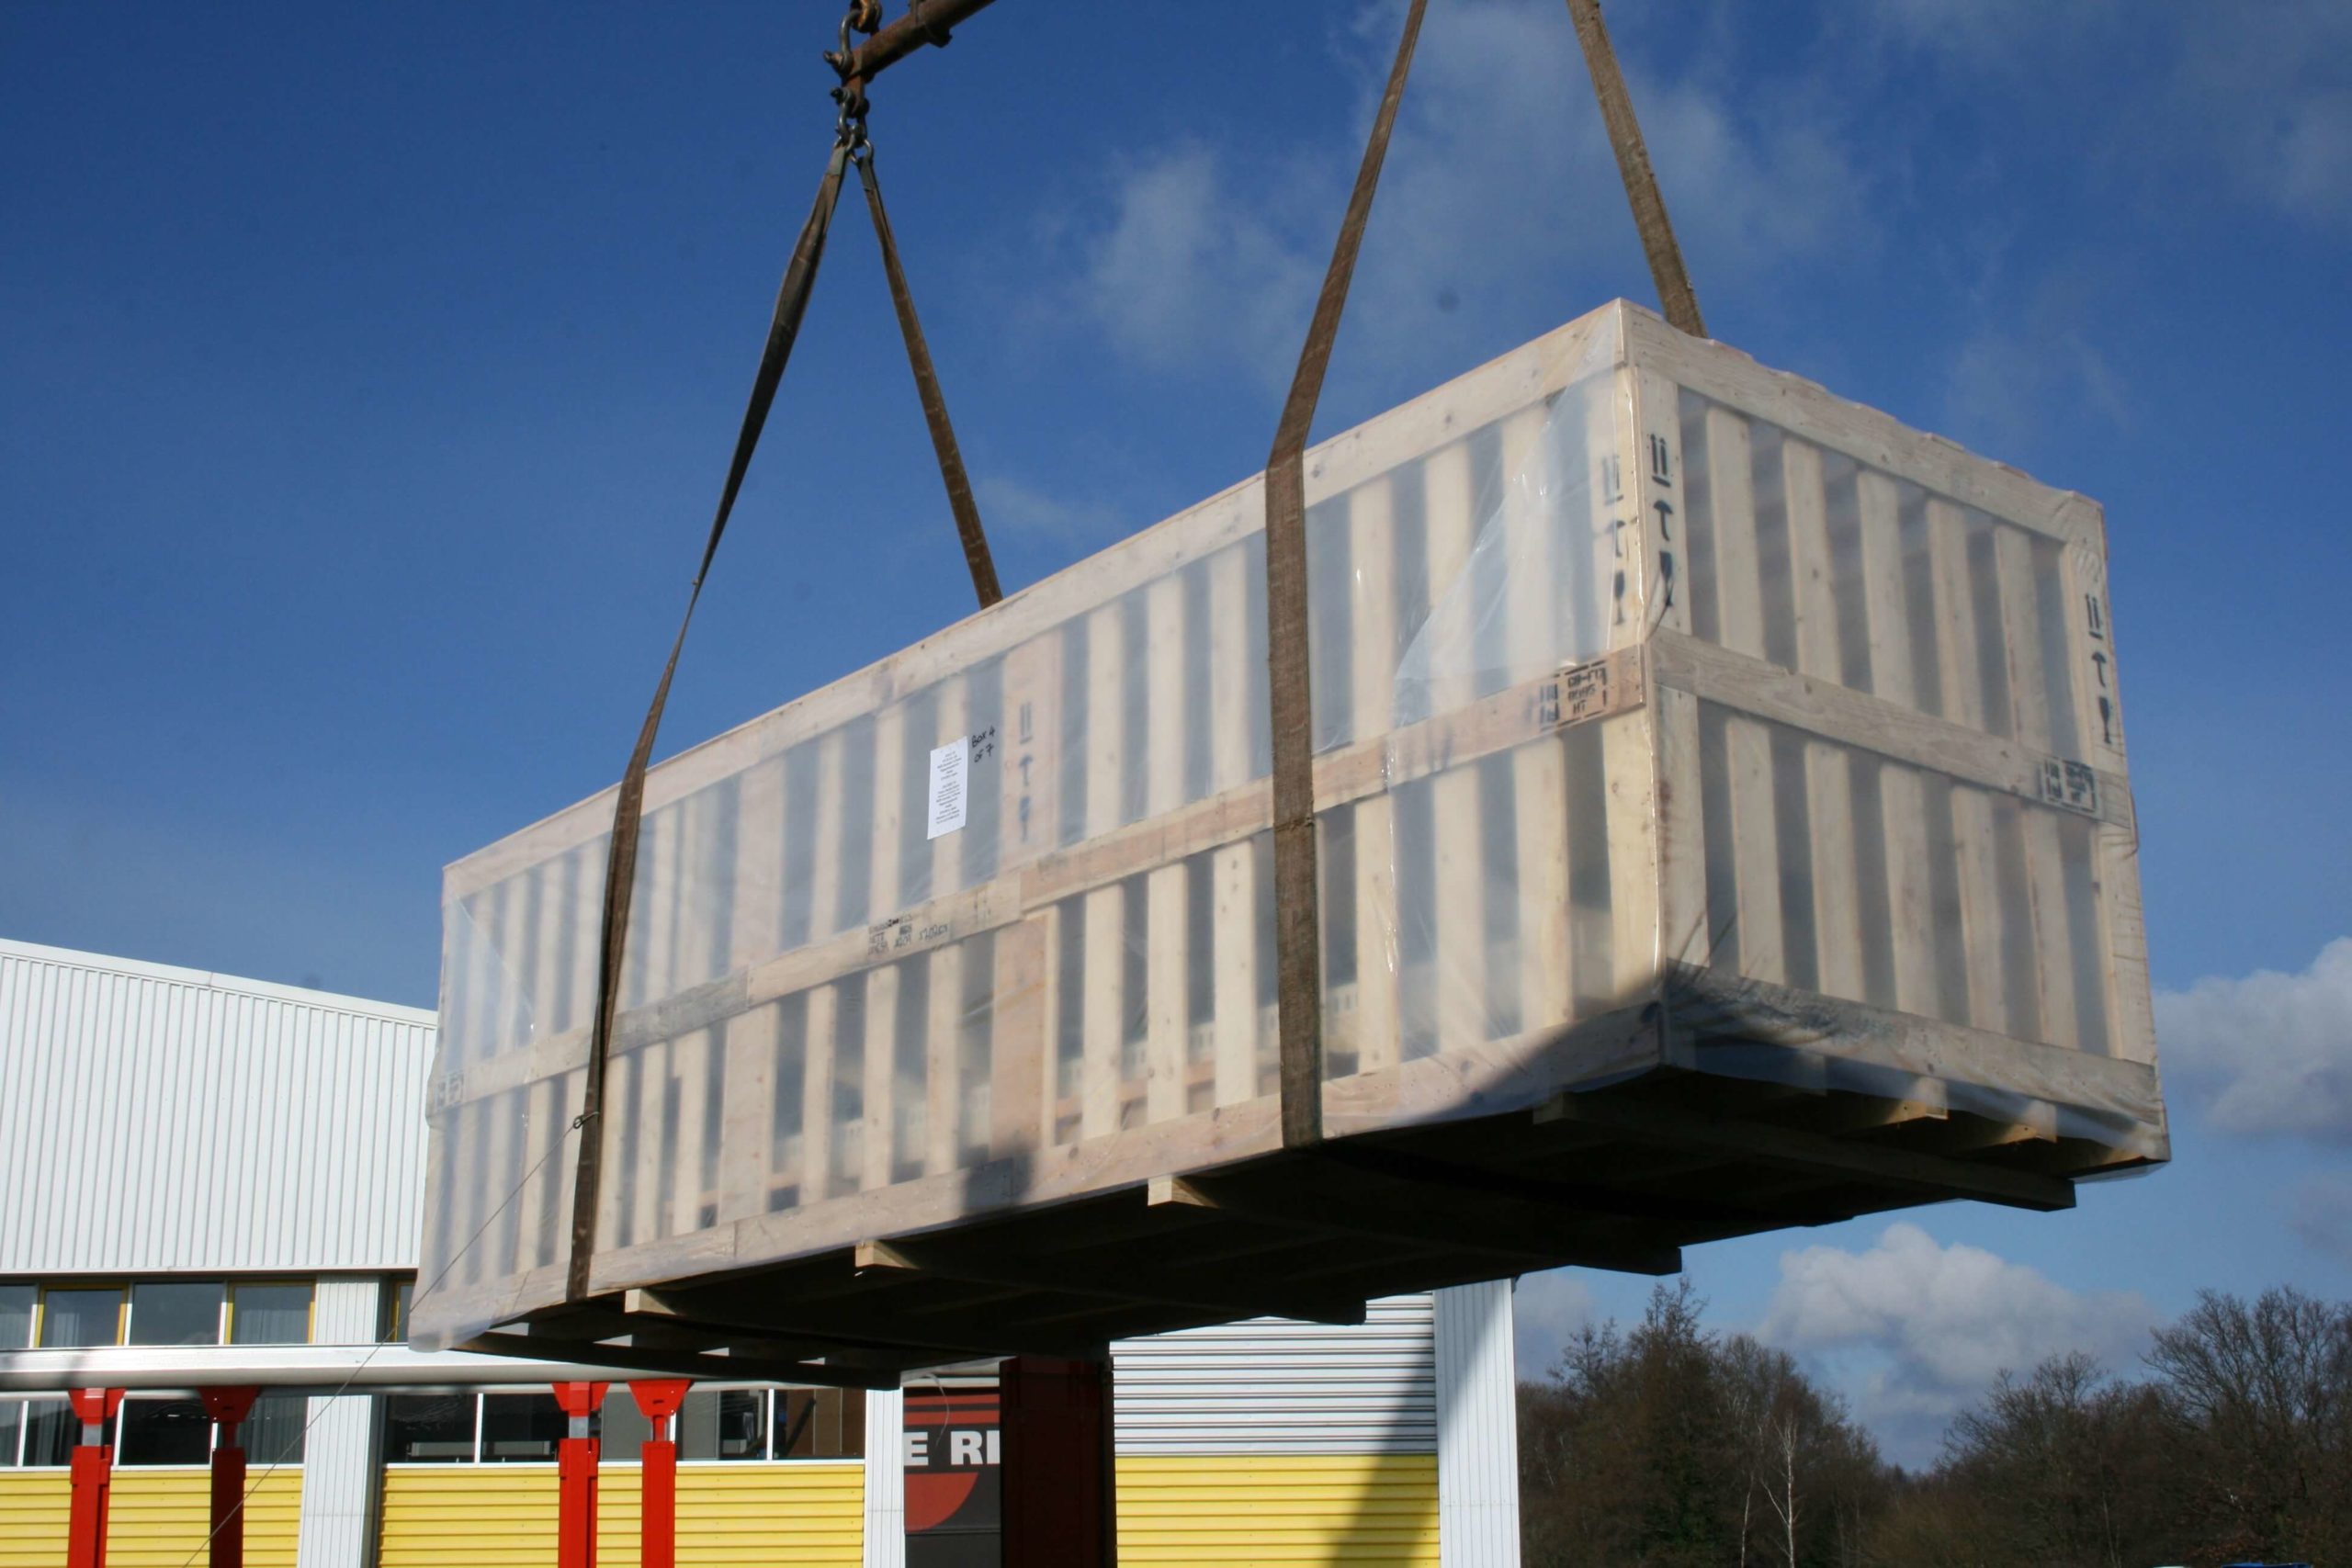 Large wooden case being loaded onto shipment